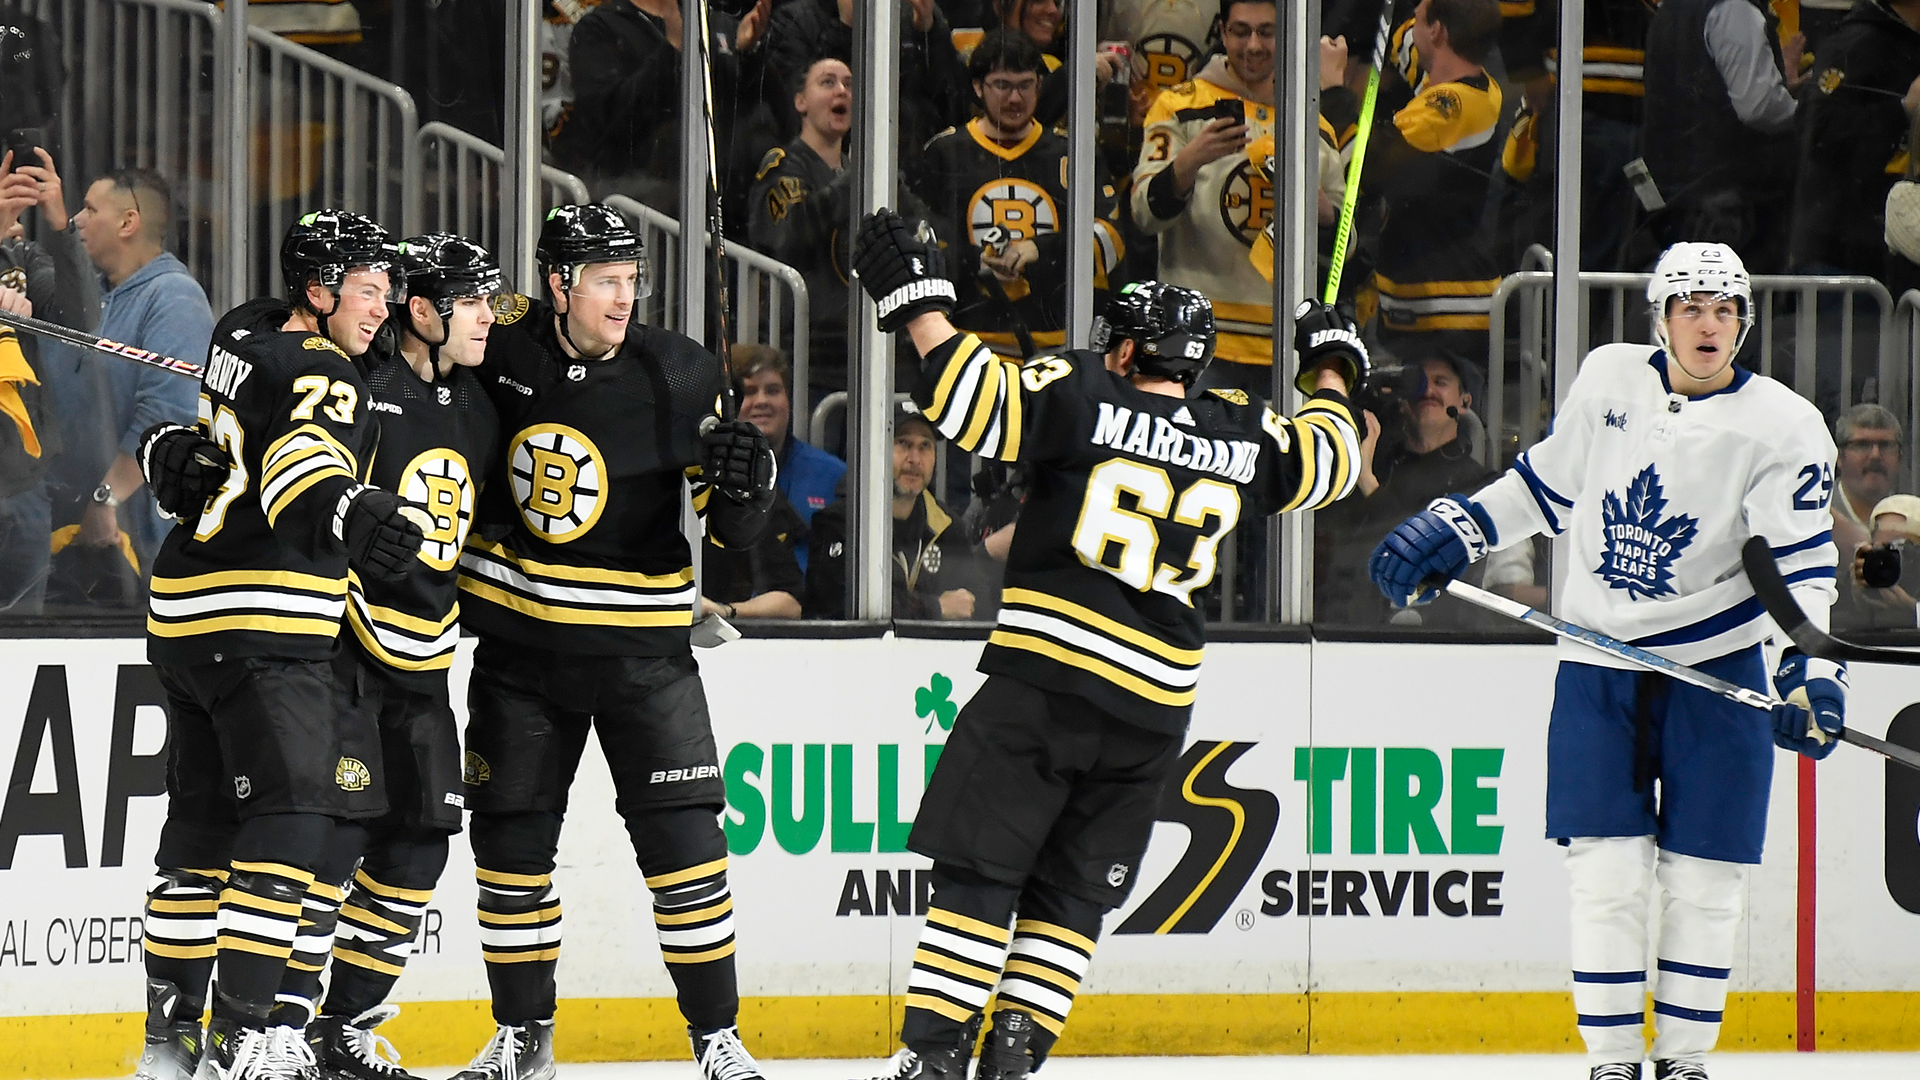 Bruins Dominate Maple Leafs in Stanley Cup Playoffs Opener: Five Goals, Physical Play, and Costly Mistakes from Toronto